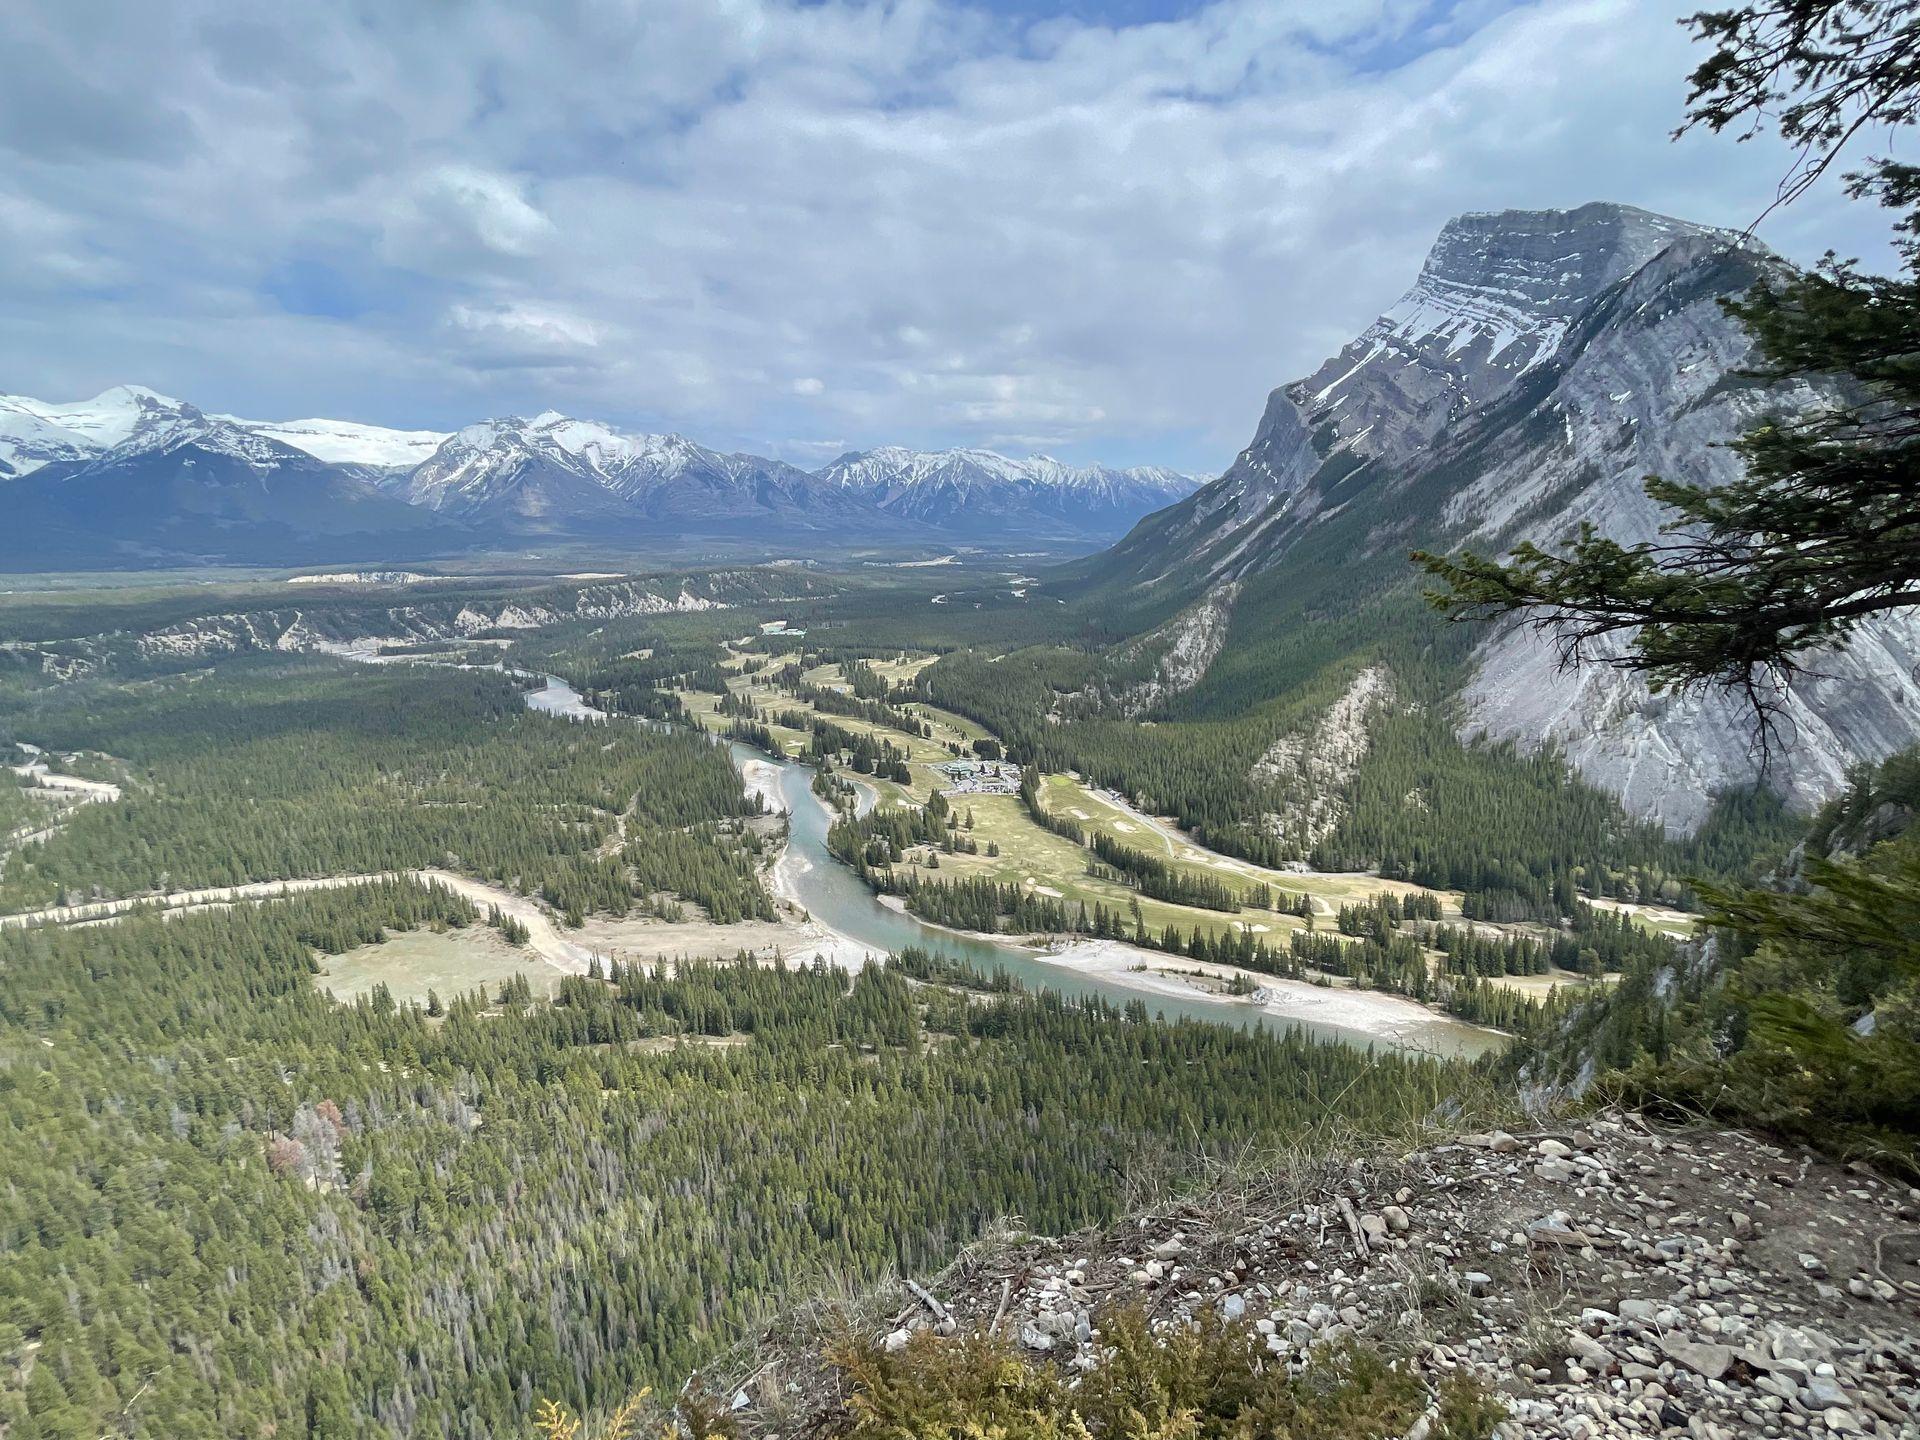 The view from Tunnel Mountain. There is a valley full of trees and a river, plus a mountain on the right side of the frame.